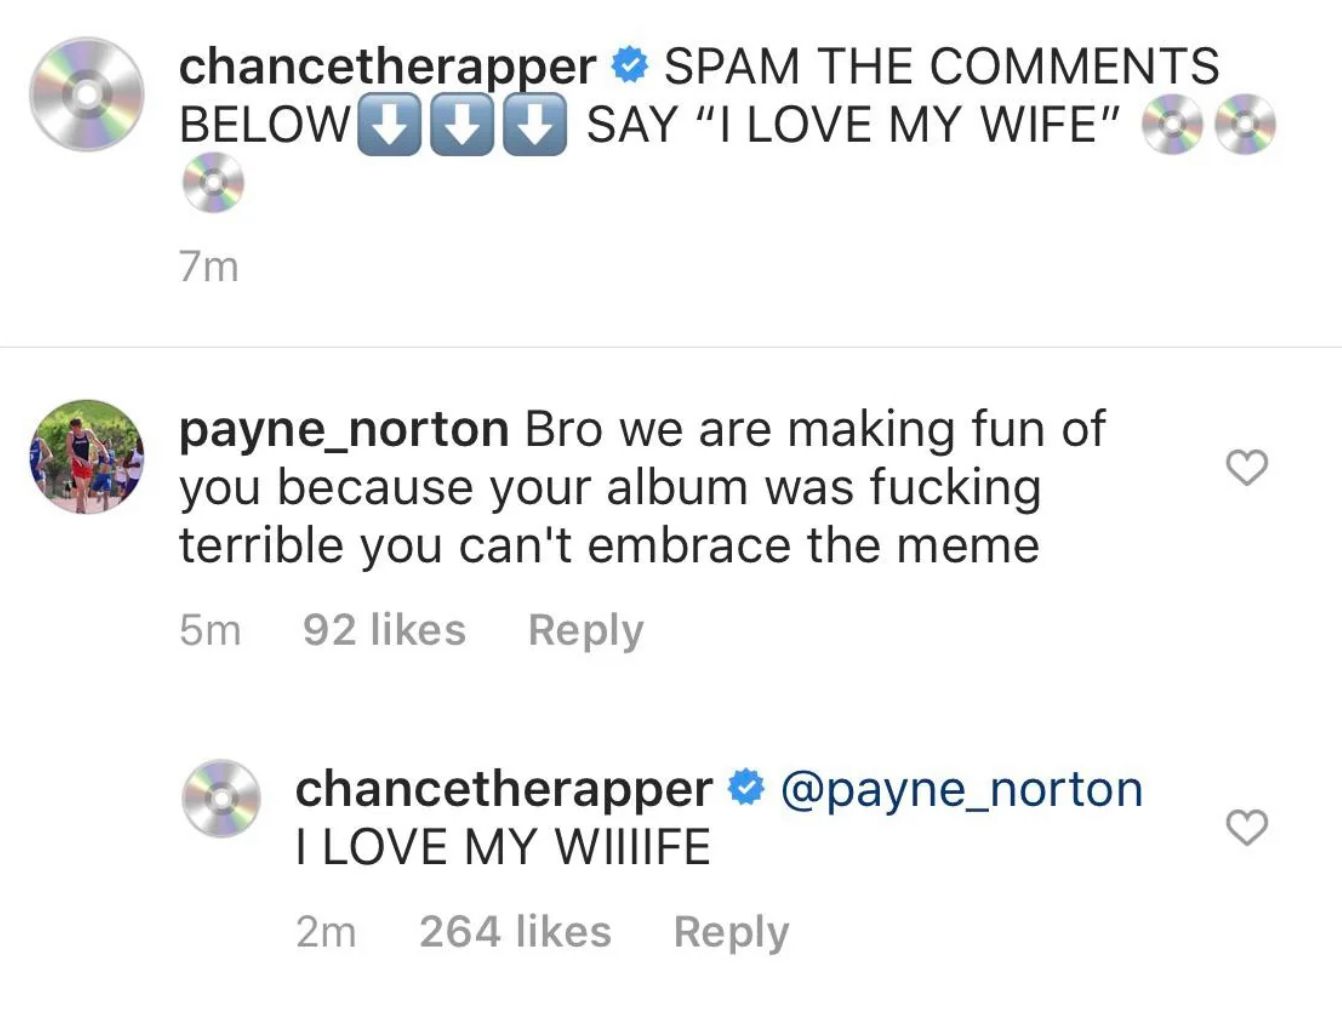 chancetherapper SPAM THE COMMENTS
BELOW SAY "I LOVE MY WIFE"
7m
payne_norton Bro we are making fun of
you because your album was fucking
terrible you can't embrace the meme
5m 92 likes
Reply
chancetherapper @payne_norton
I LOVE MY WIIIIFE
2m 264 likes Reply